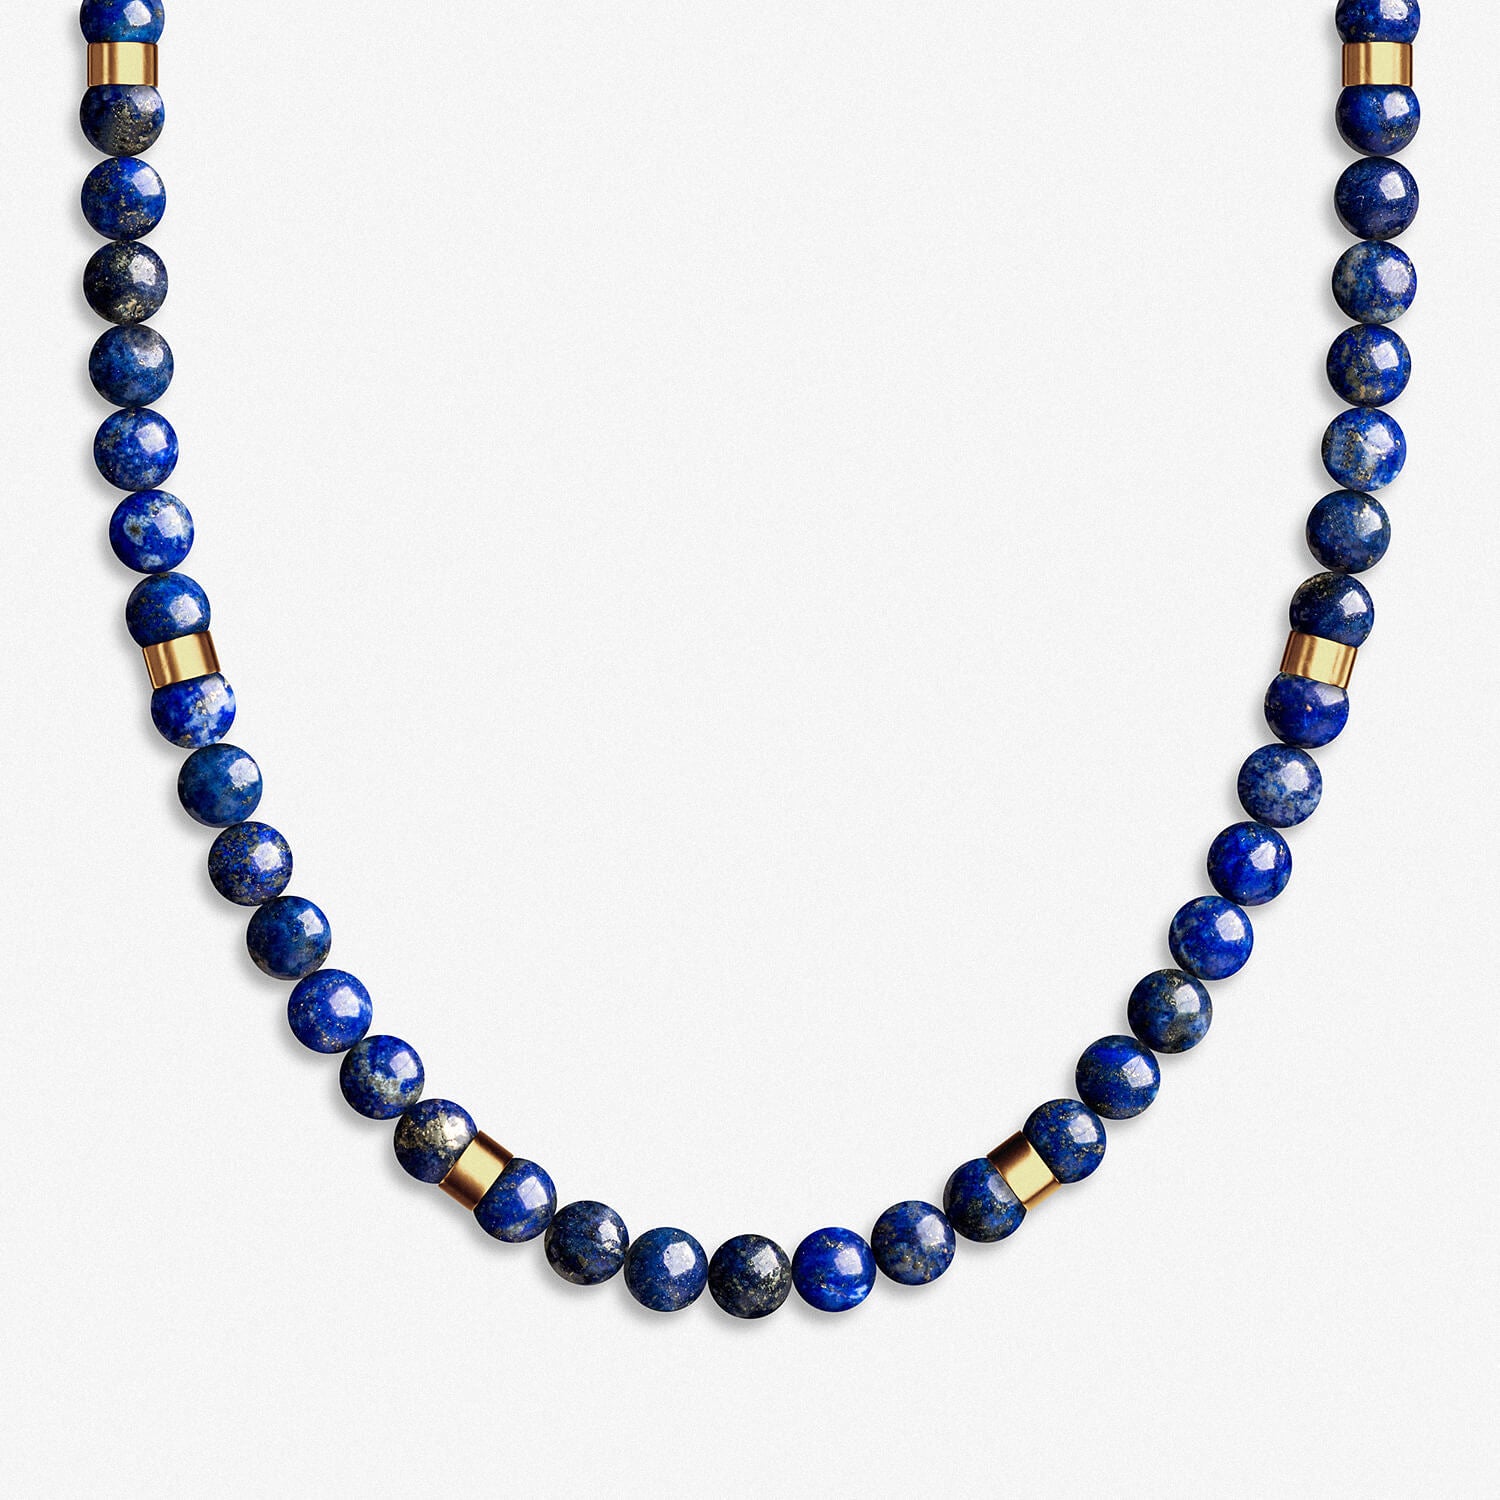 Painted Recycled Paper and Brass Beaded Necklace in Blue - Planetary Blue |  NOVICA